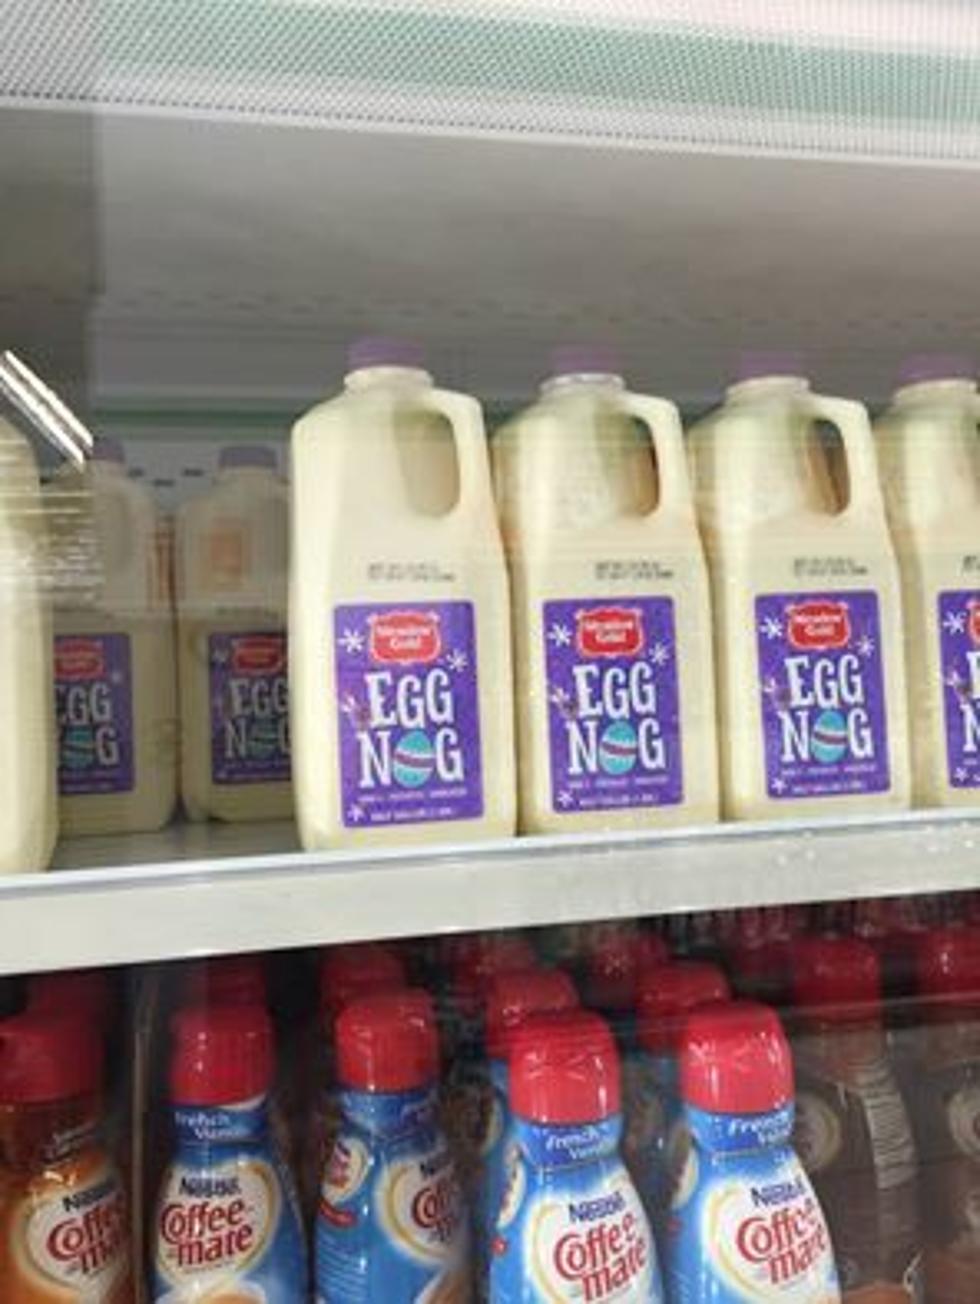 Look What I Found in the Dairy Section, Easter Eggnog!